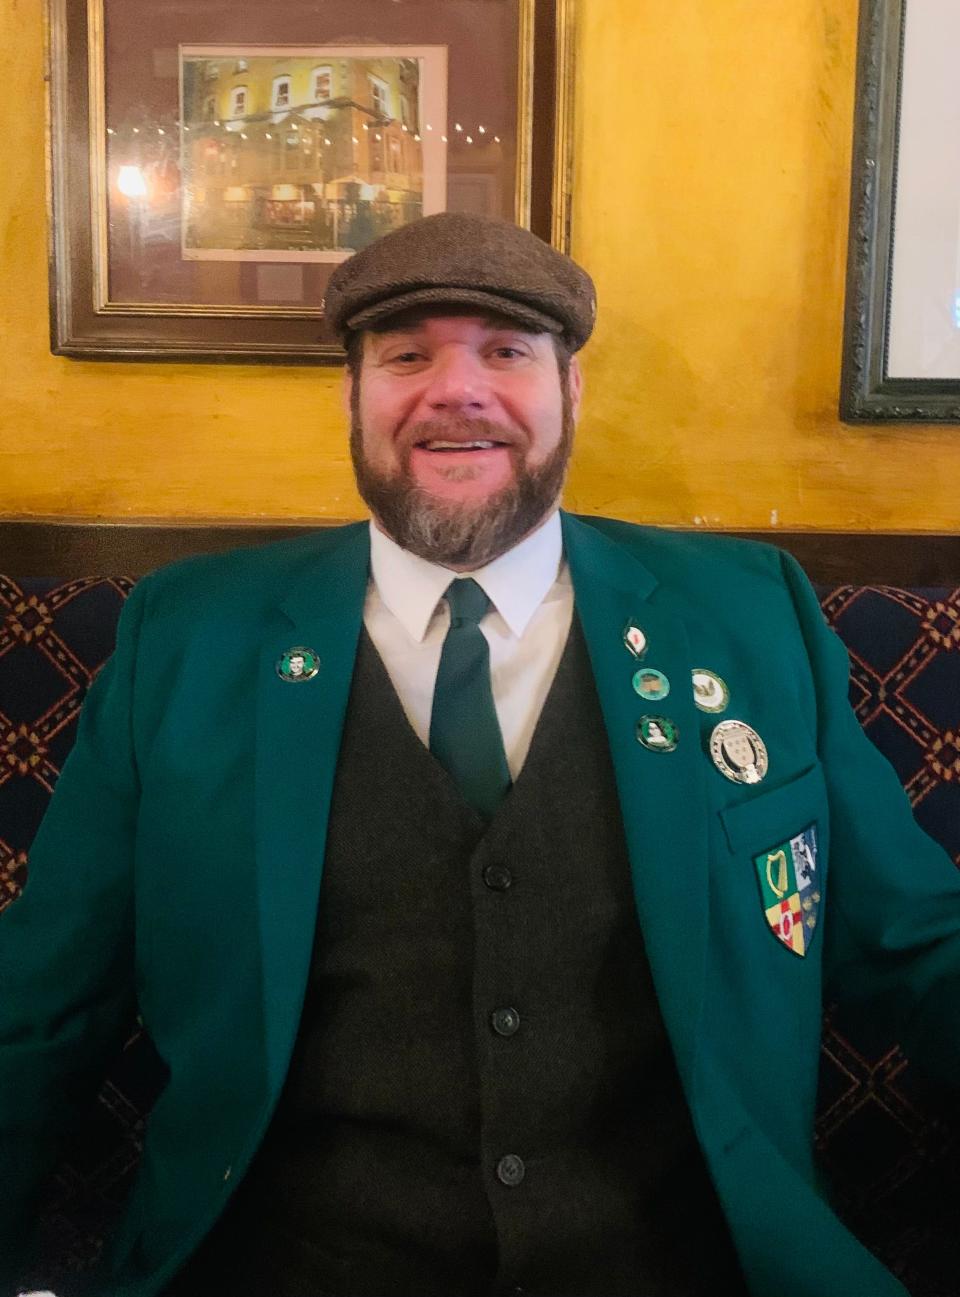 David Ireland was elected as the new president of the Irish Culture Club of Delaware last year.